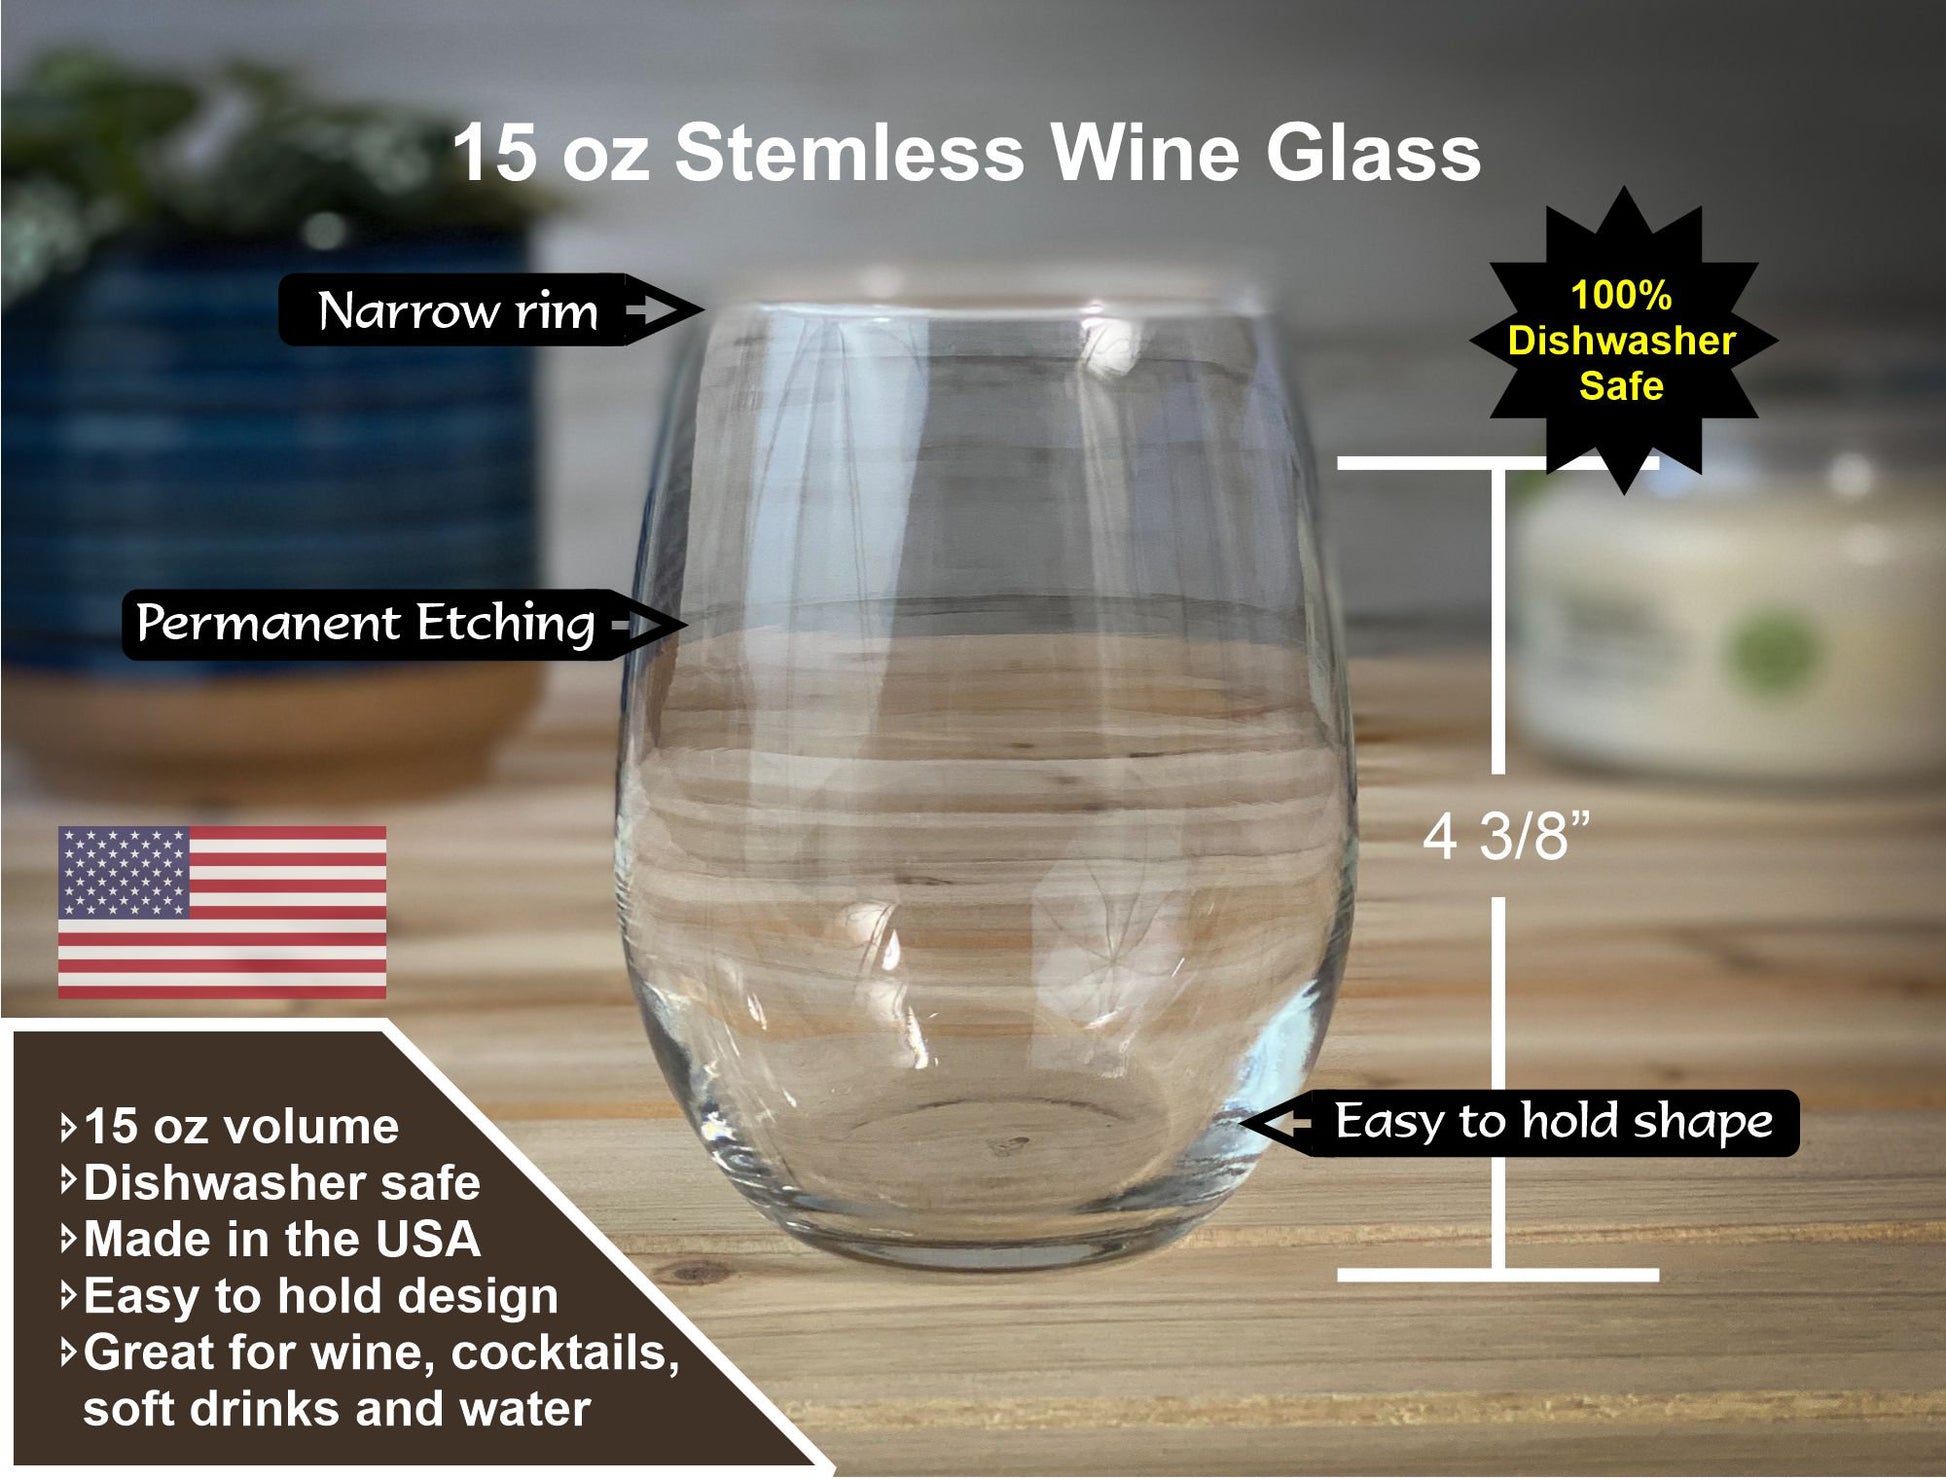 Loon Lake - Etched 15 oz Stemless Wine Glass